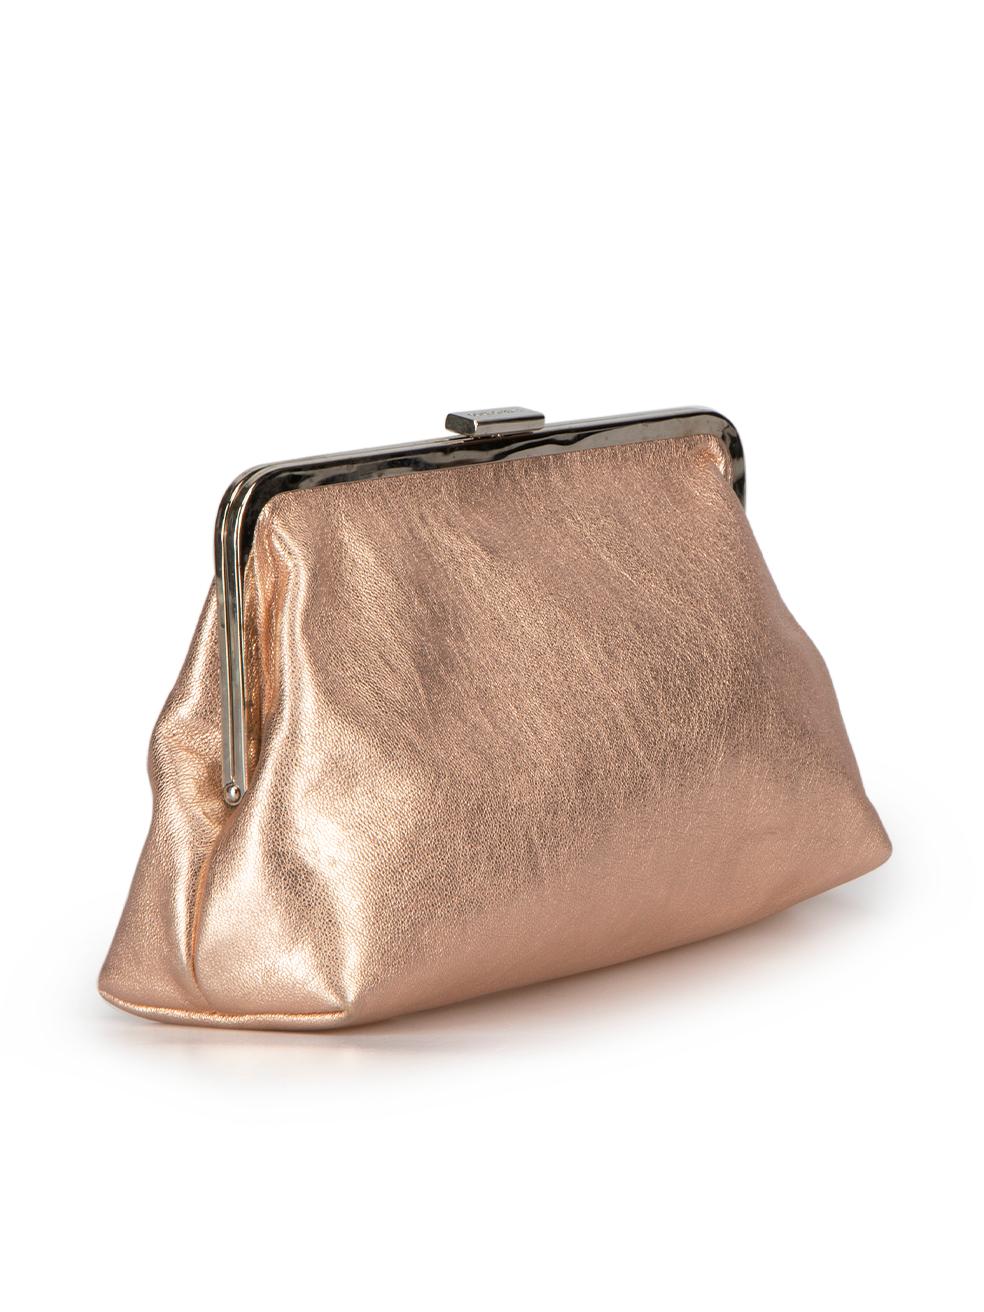 CONDITION is Very good. Minimal wear to bag is evident. Minimal wear to the metal trim with tarnish spots. There are also scuff marks to the base, corners and rear on this used Dolce & Gabbana designer resale item.



Details


Pink